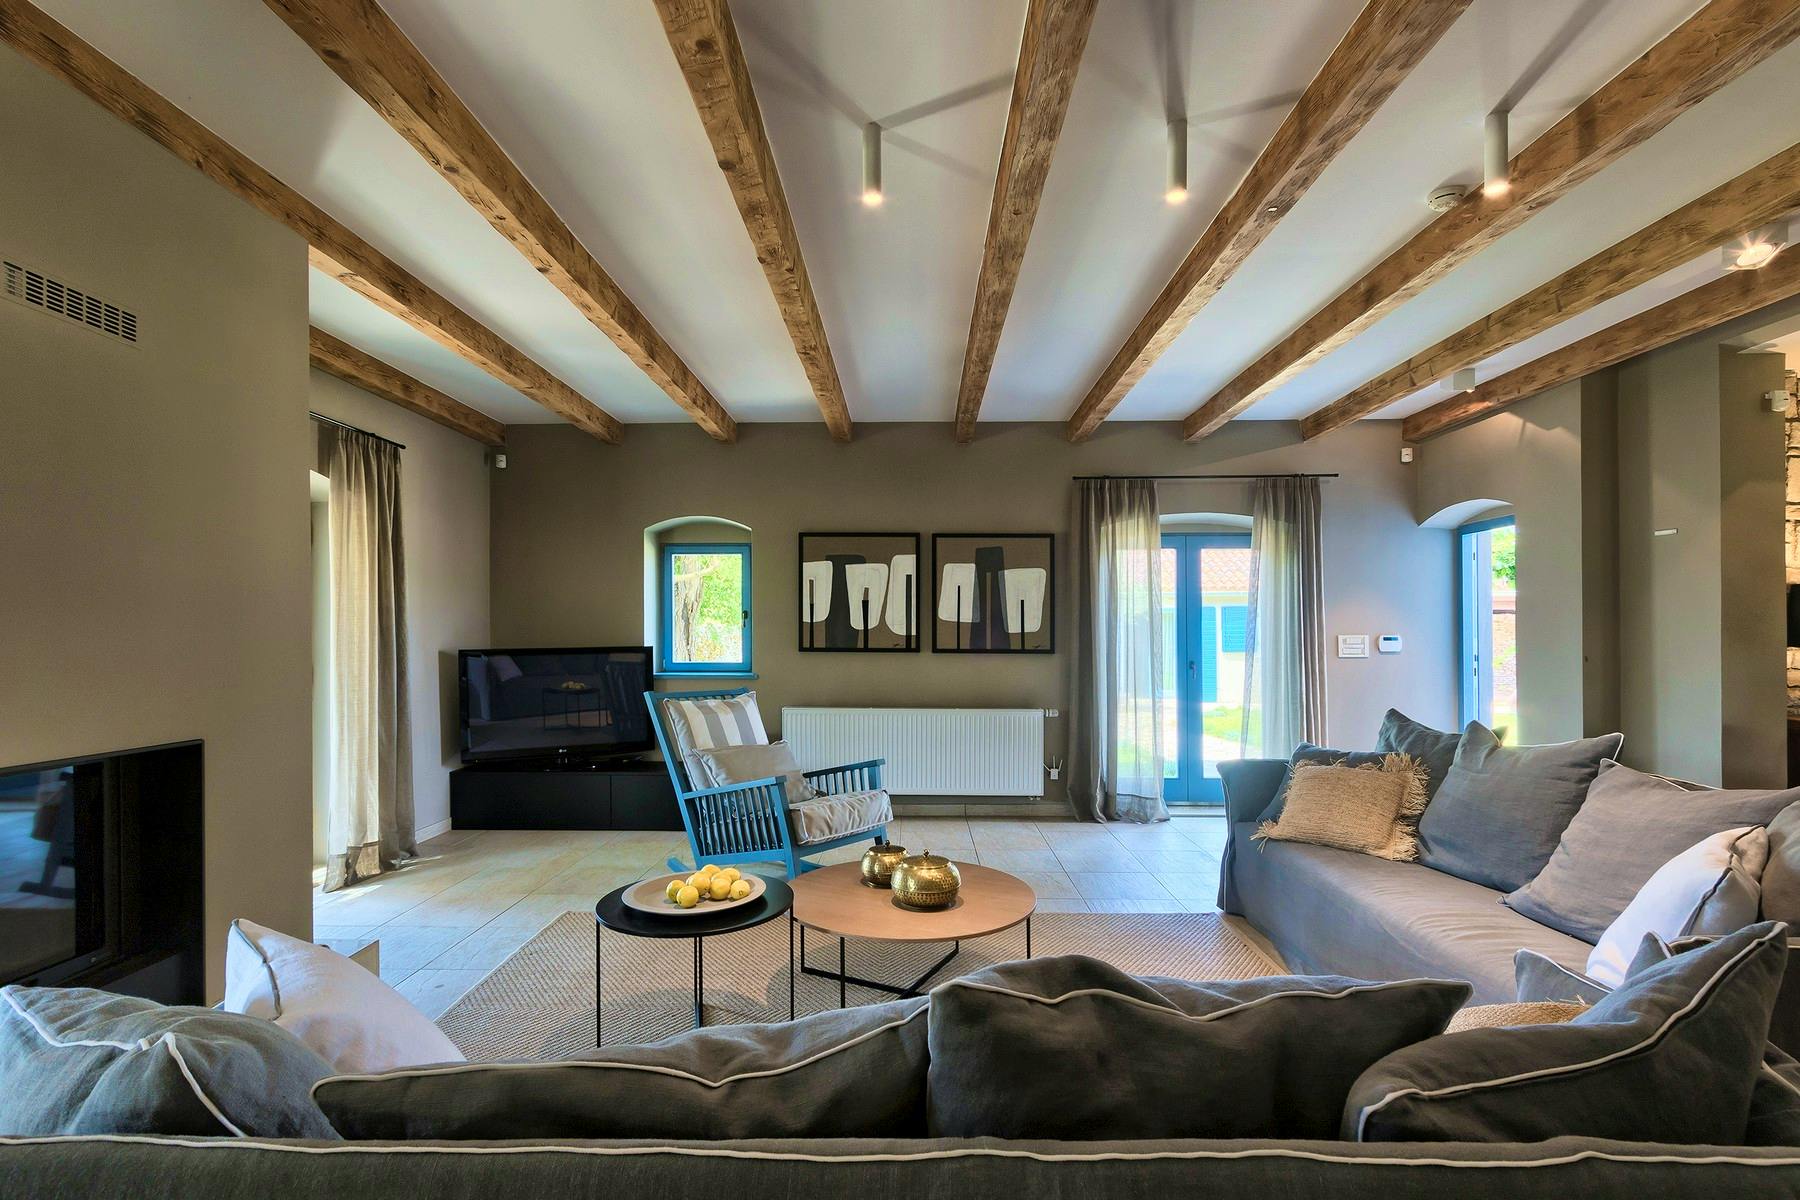 Living area enhanced by wooden beams